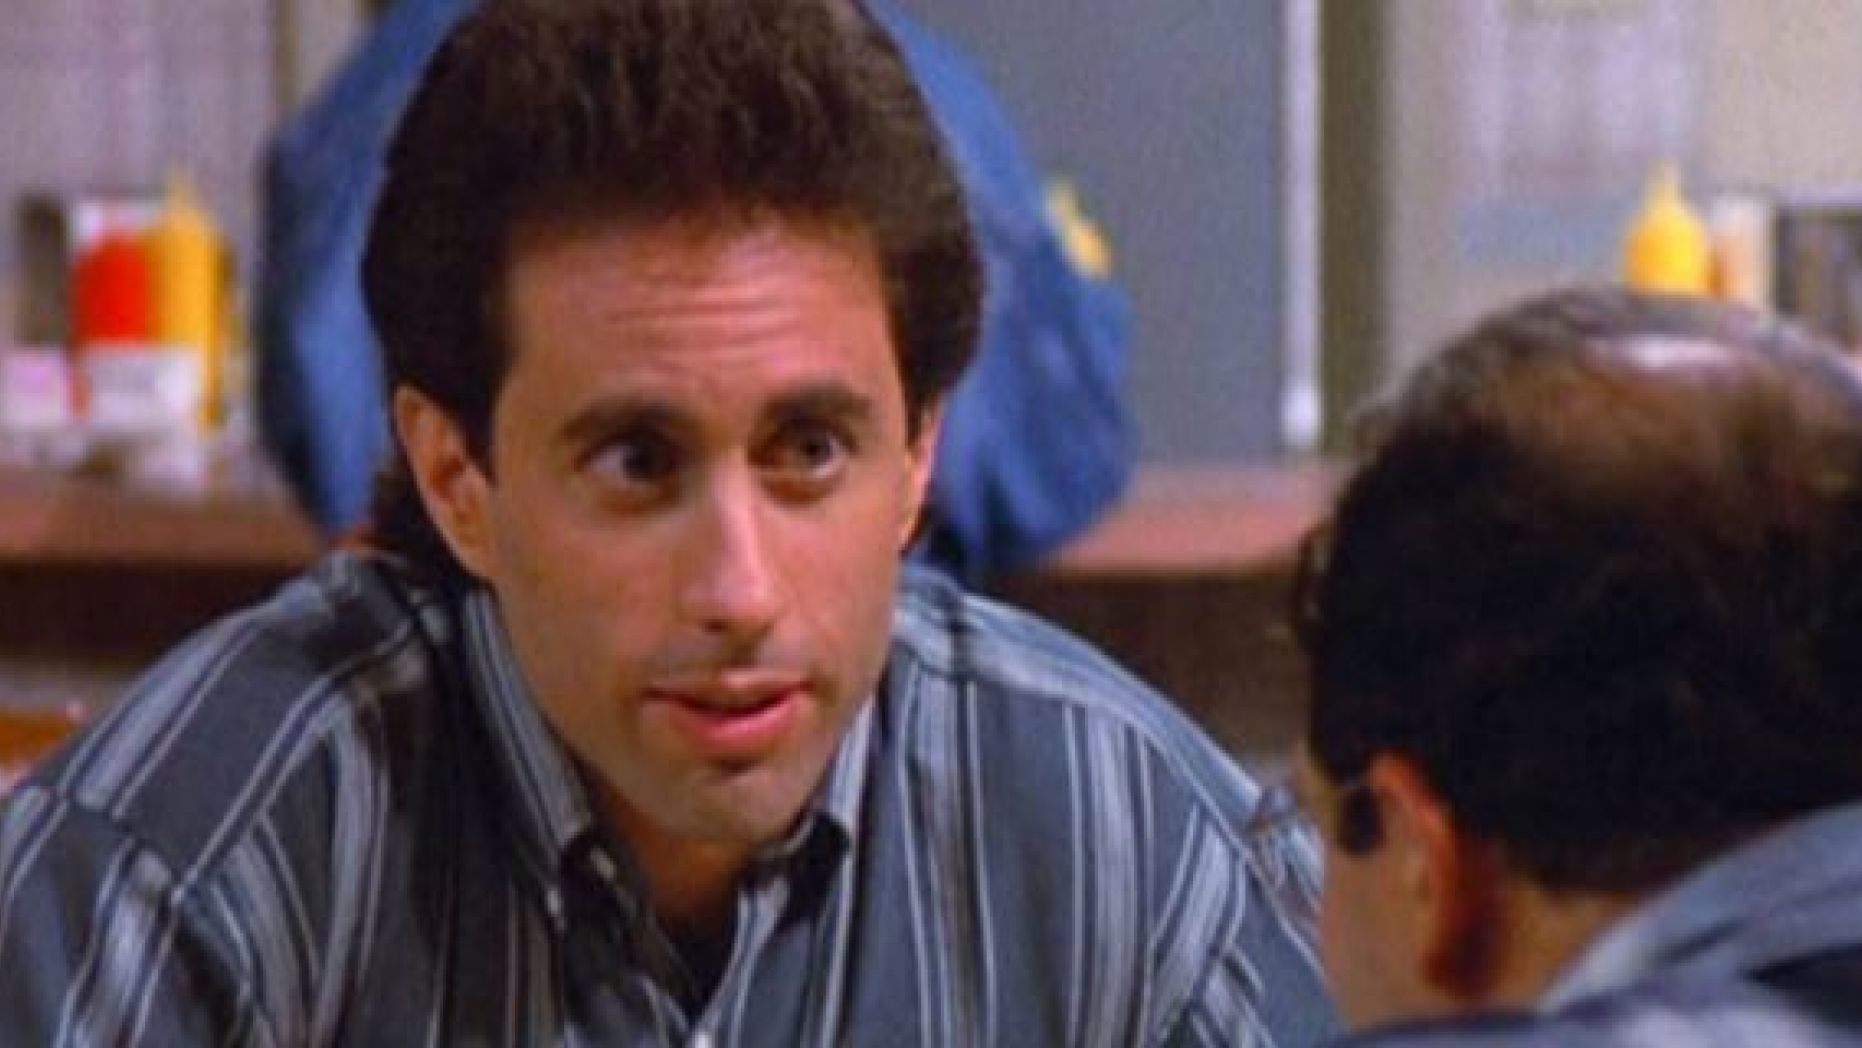 "Seinfeld" makes the list of series with episodes worth watching on Thanksgiving.